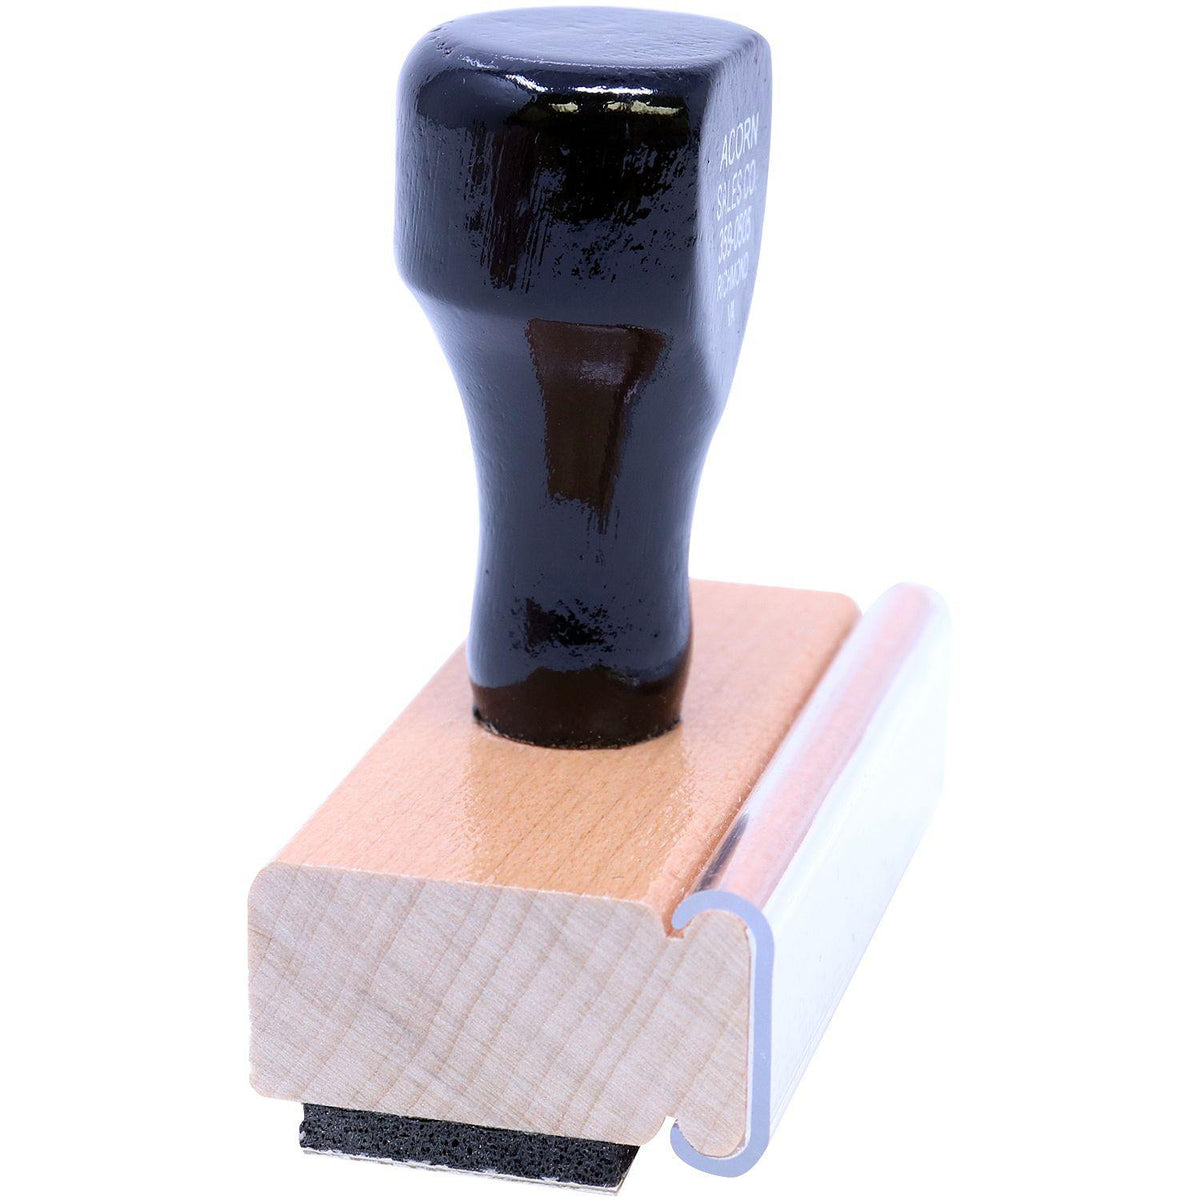 Large Temporarily Away Rubber Stamp - Engineer Seal Stamps - Brand_Acorn, Impression Size_Large, Stamp Type_Regular Stamp, Type of Use_Postal &amp; Mailing